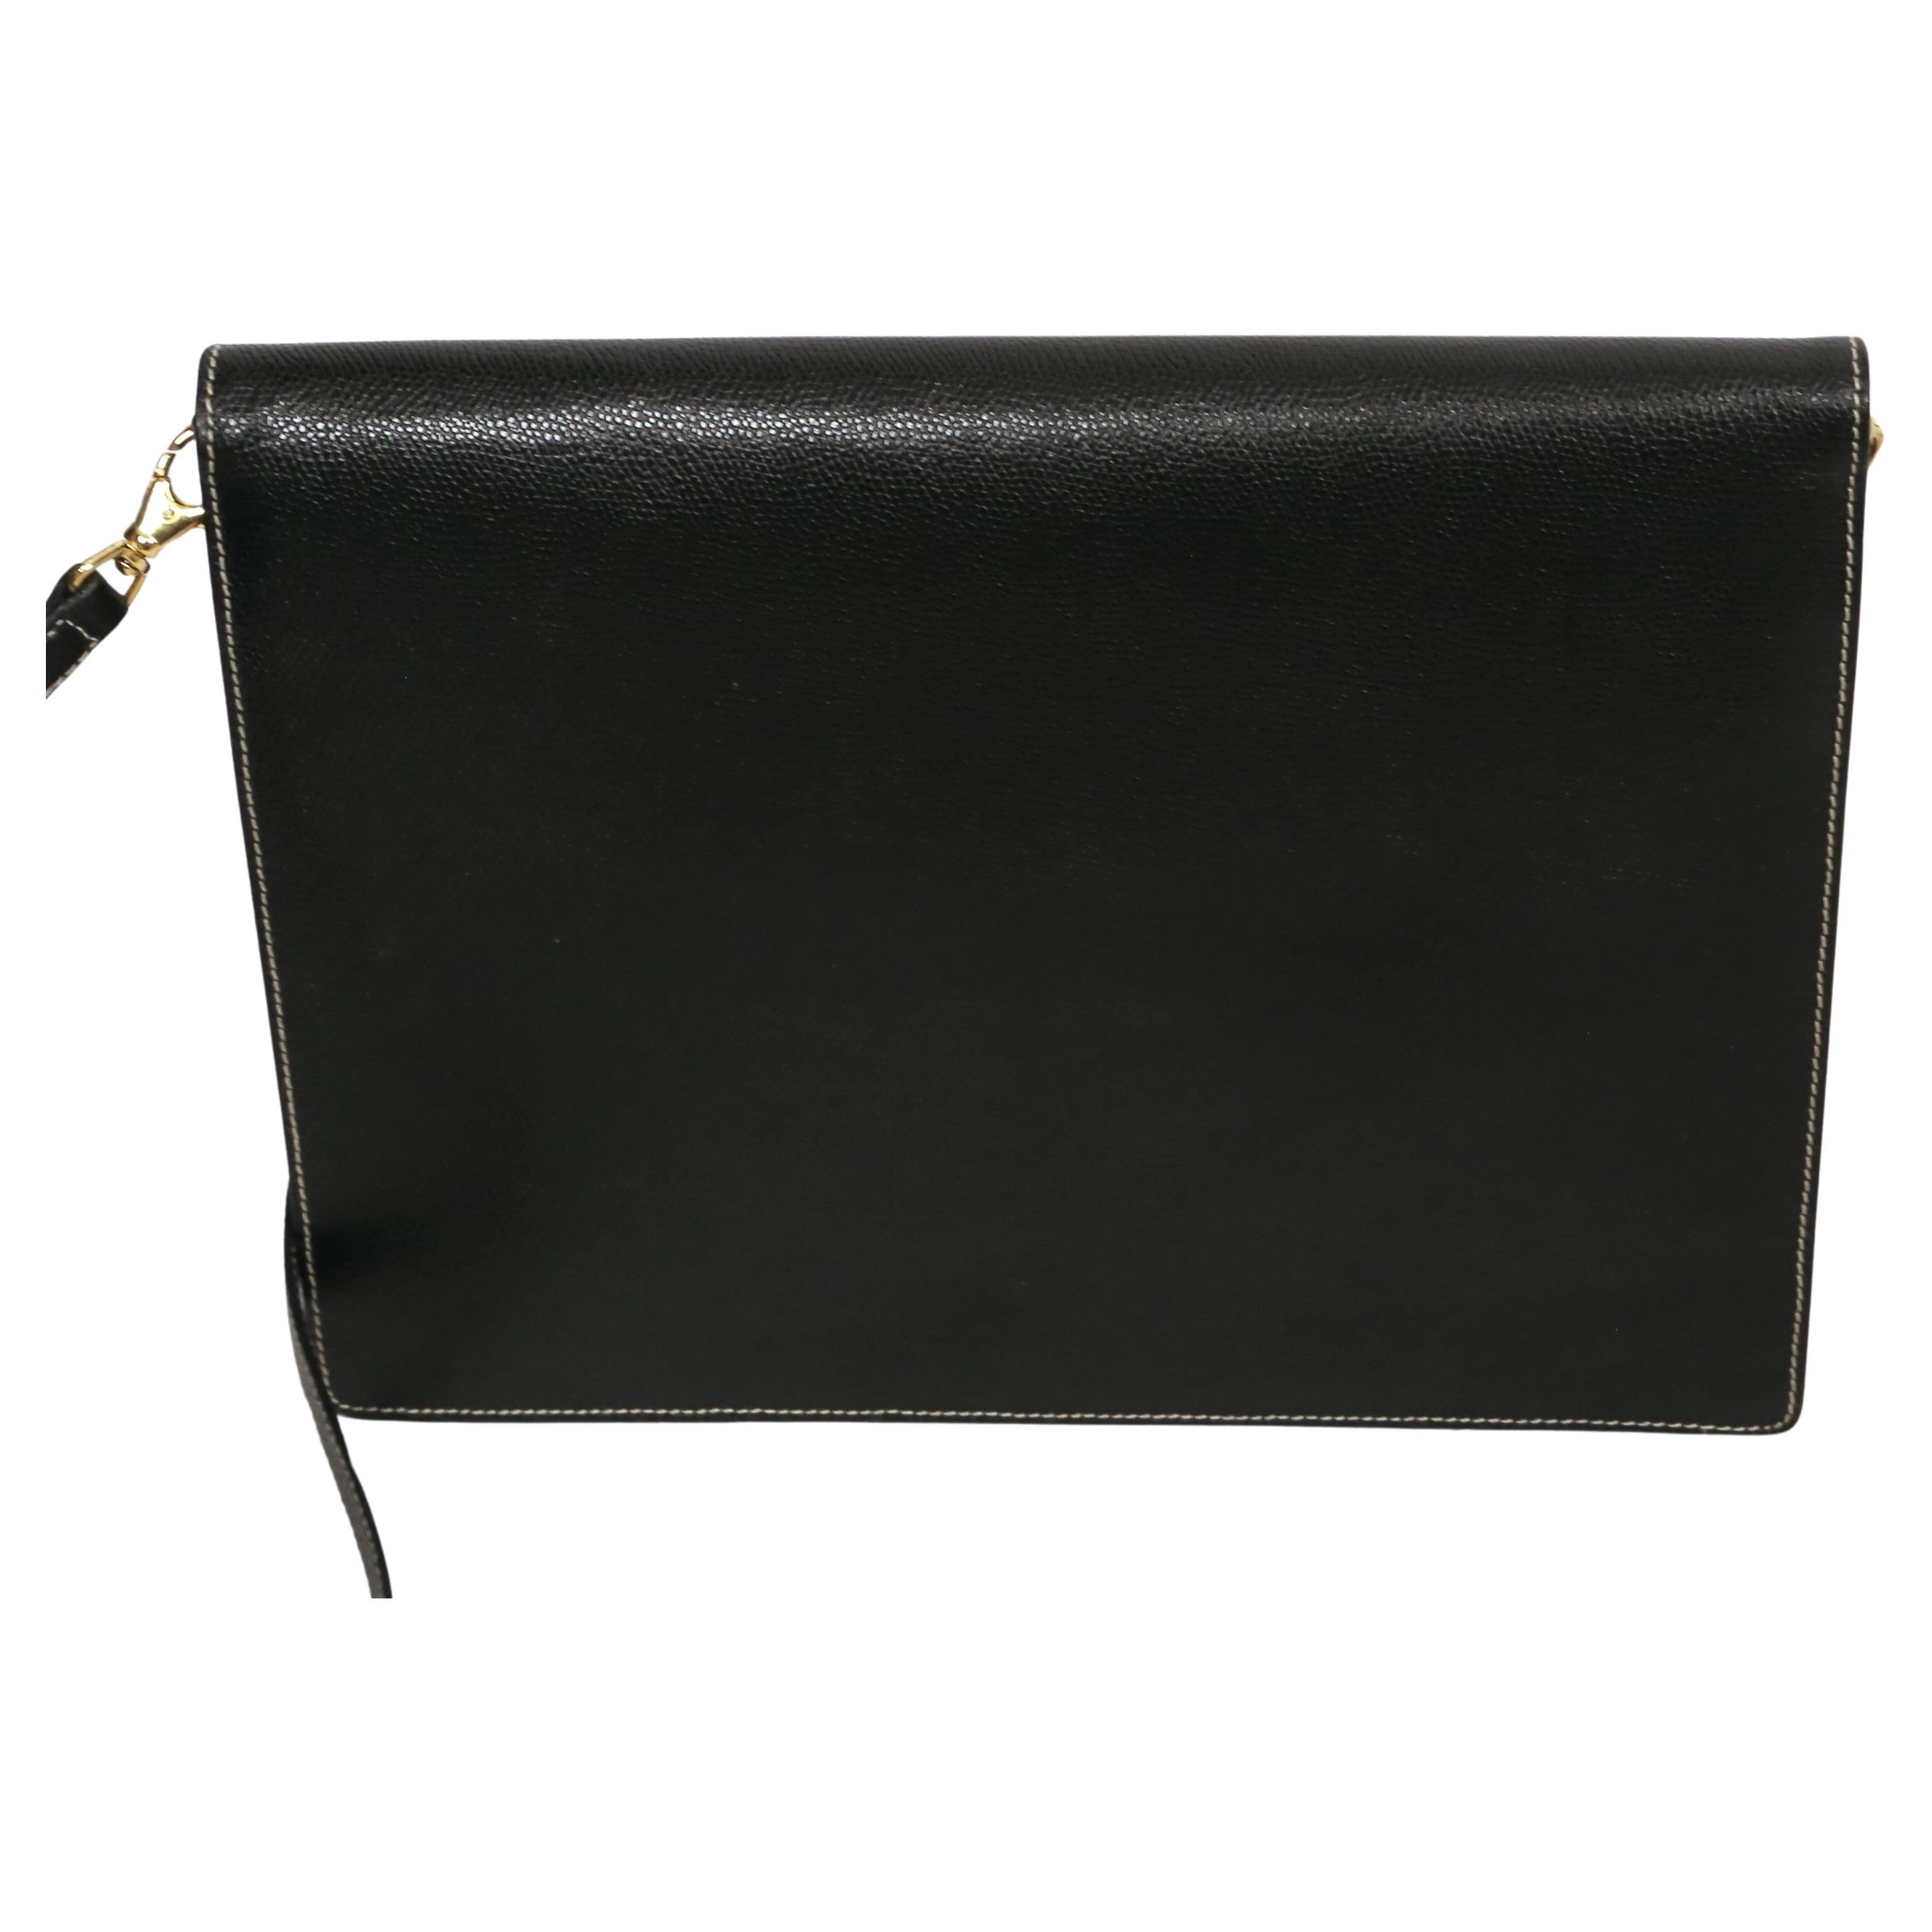 Women's or Men's  1990's VALENTINO black textured leather convertible 'envelope' clutch bag For Sale